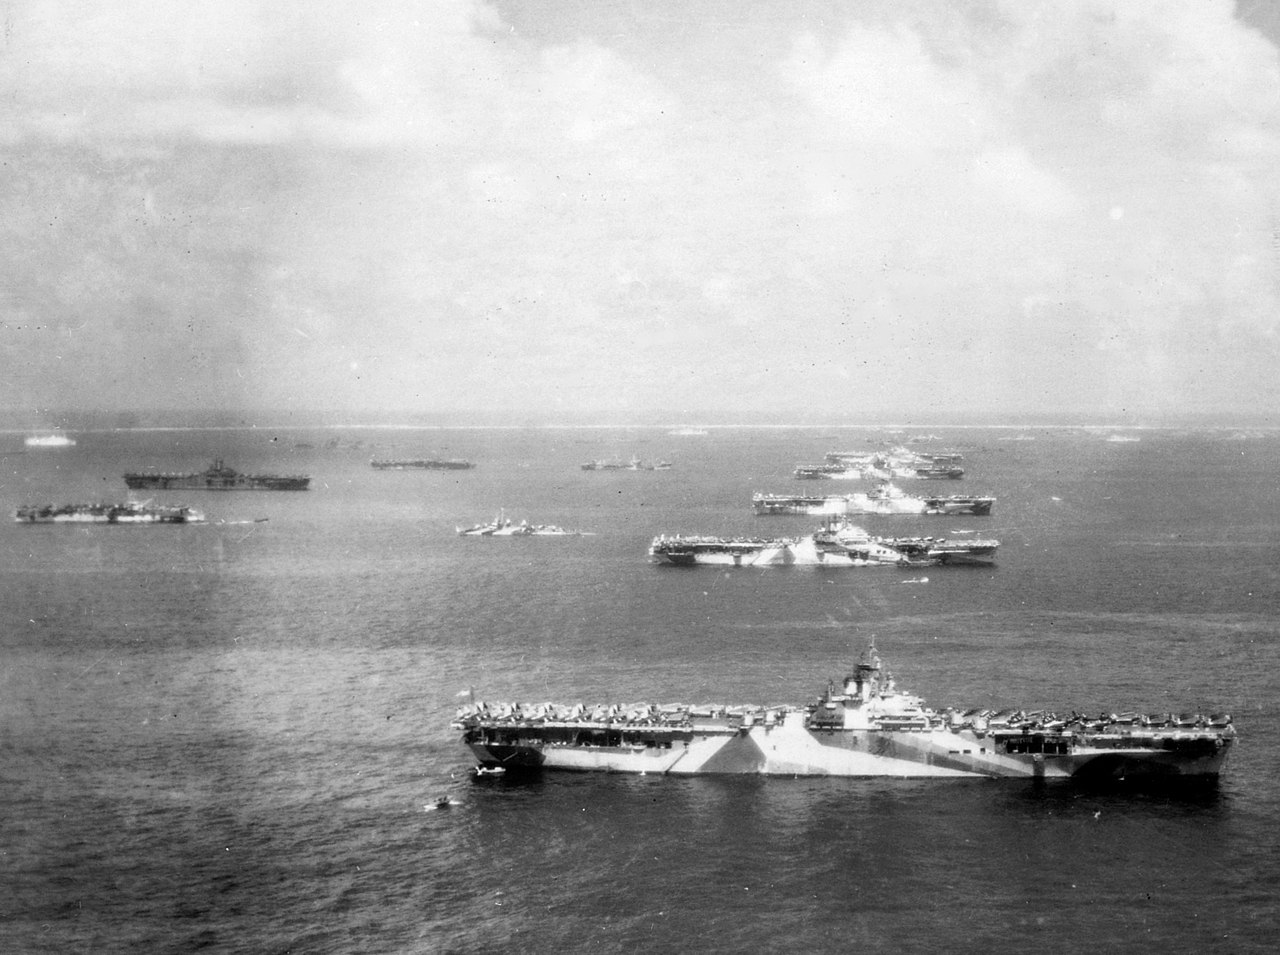 ers_row_at_Ulithi_Atoll_-_US_Third_fleet_carriers_at_anchor_on_8_December_1944_%2880-G-294131%29.jpg